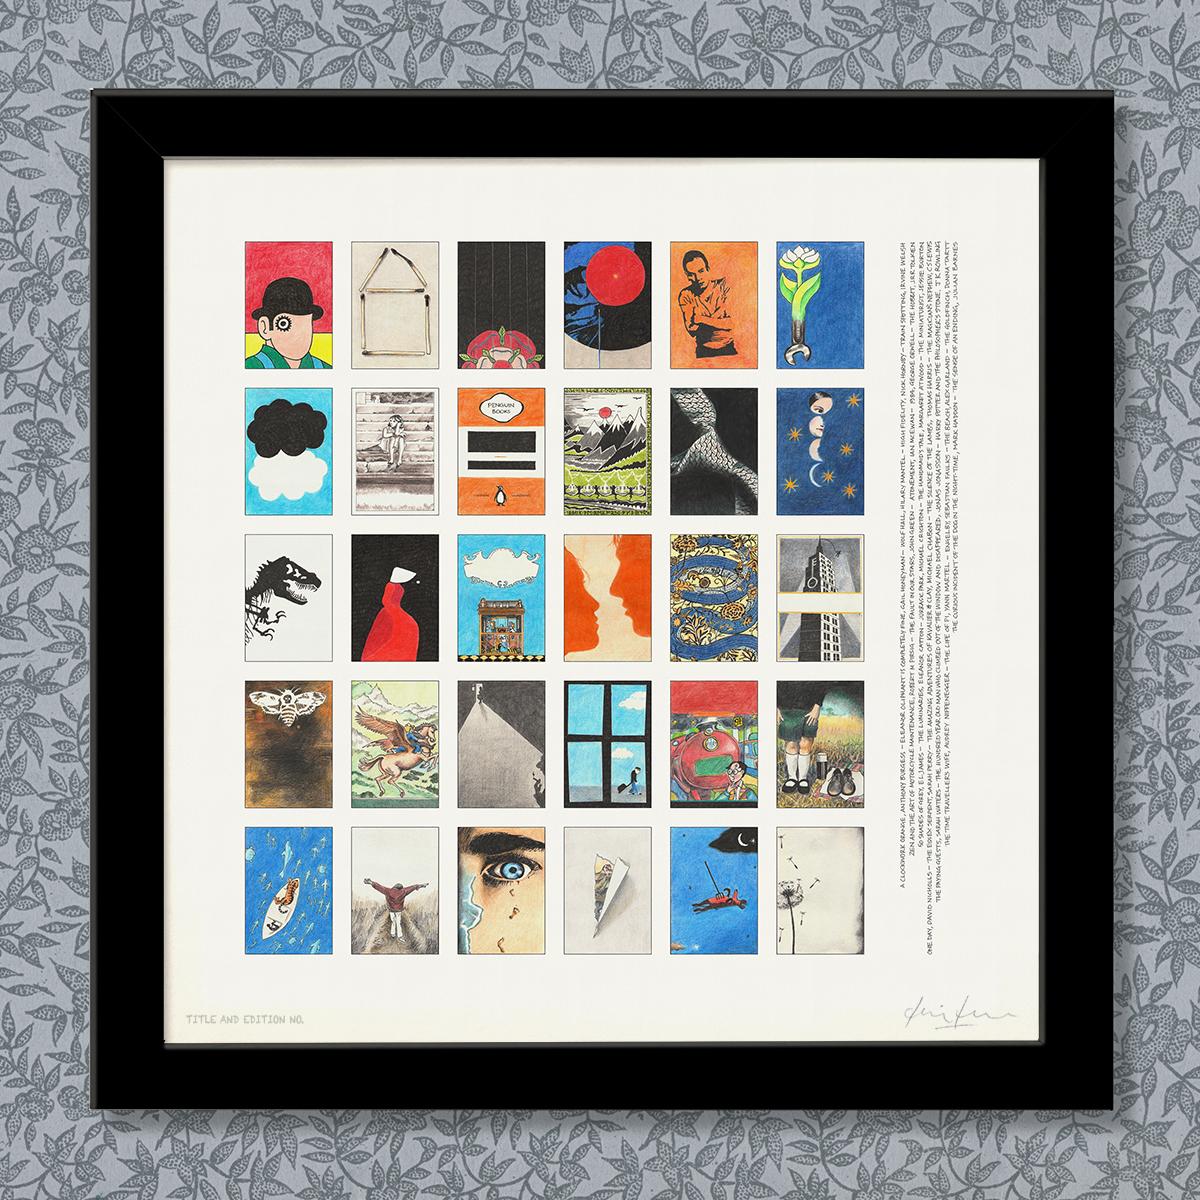 Limited edition montage print of book covers in a black frame.